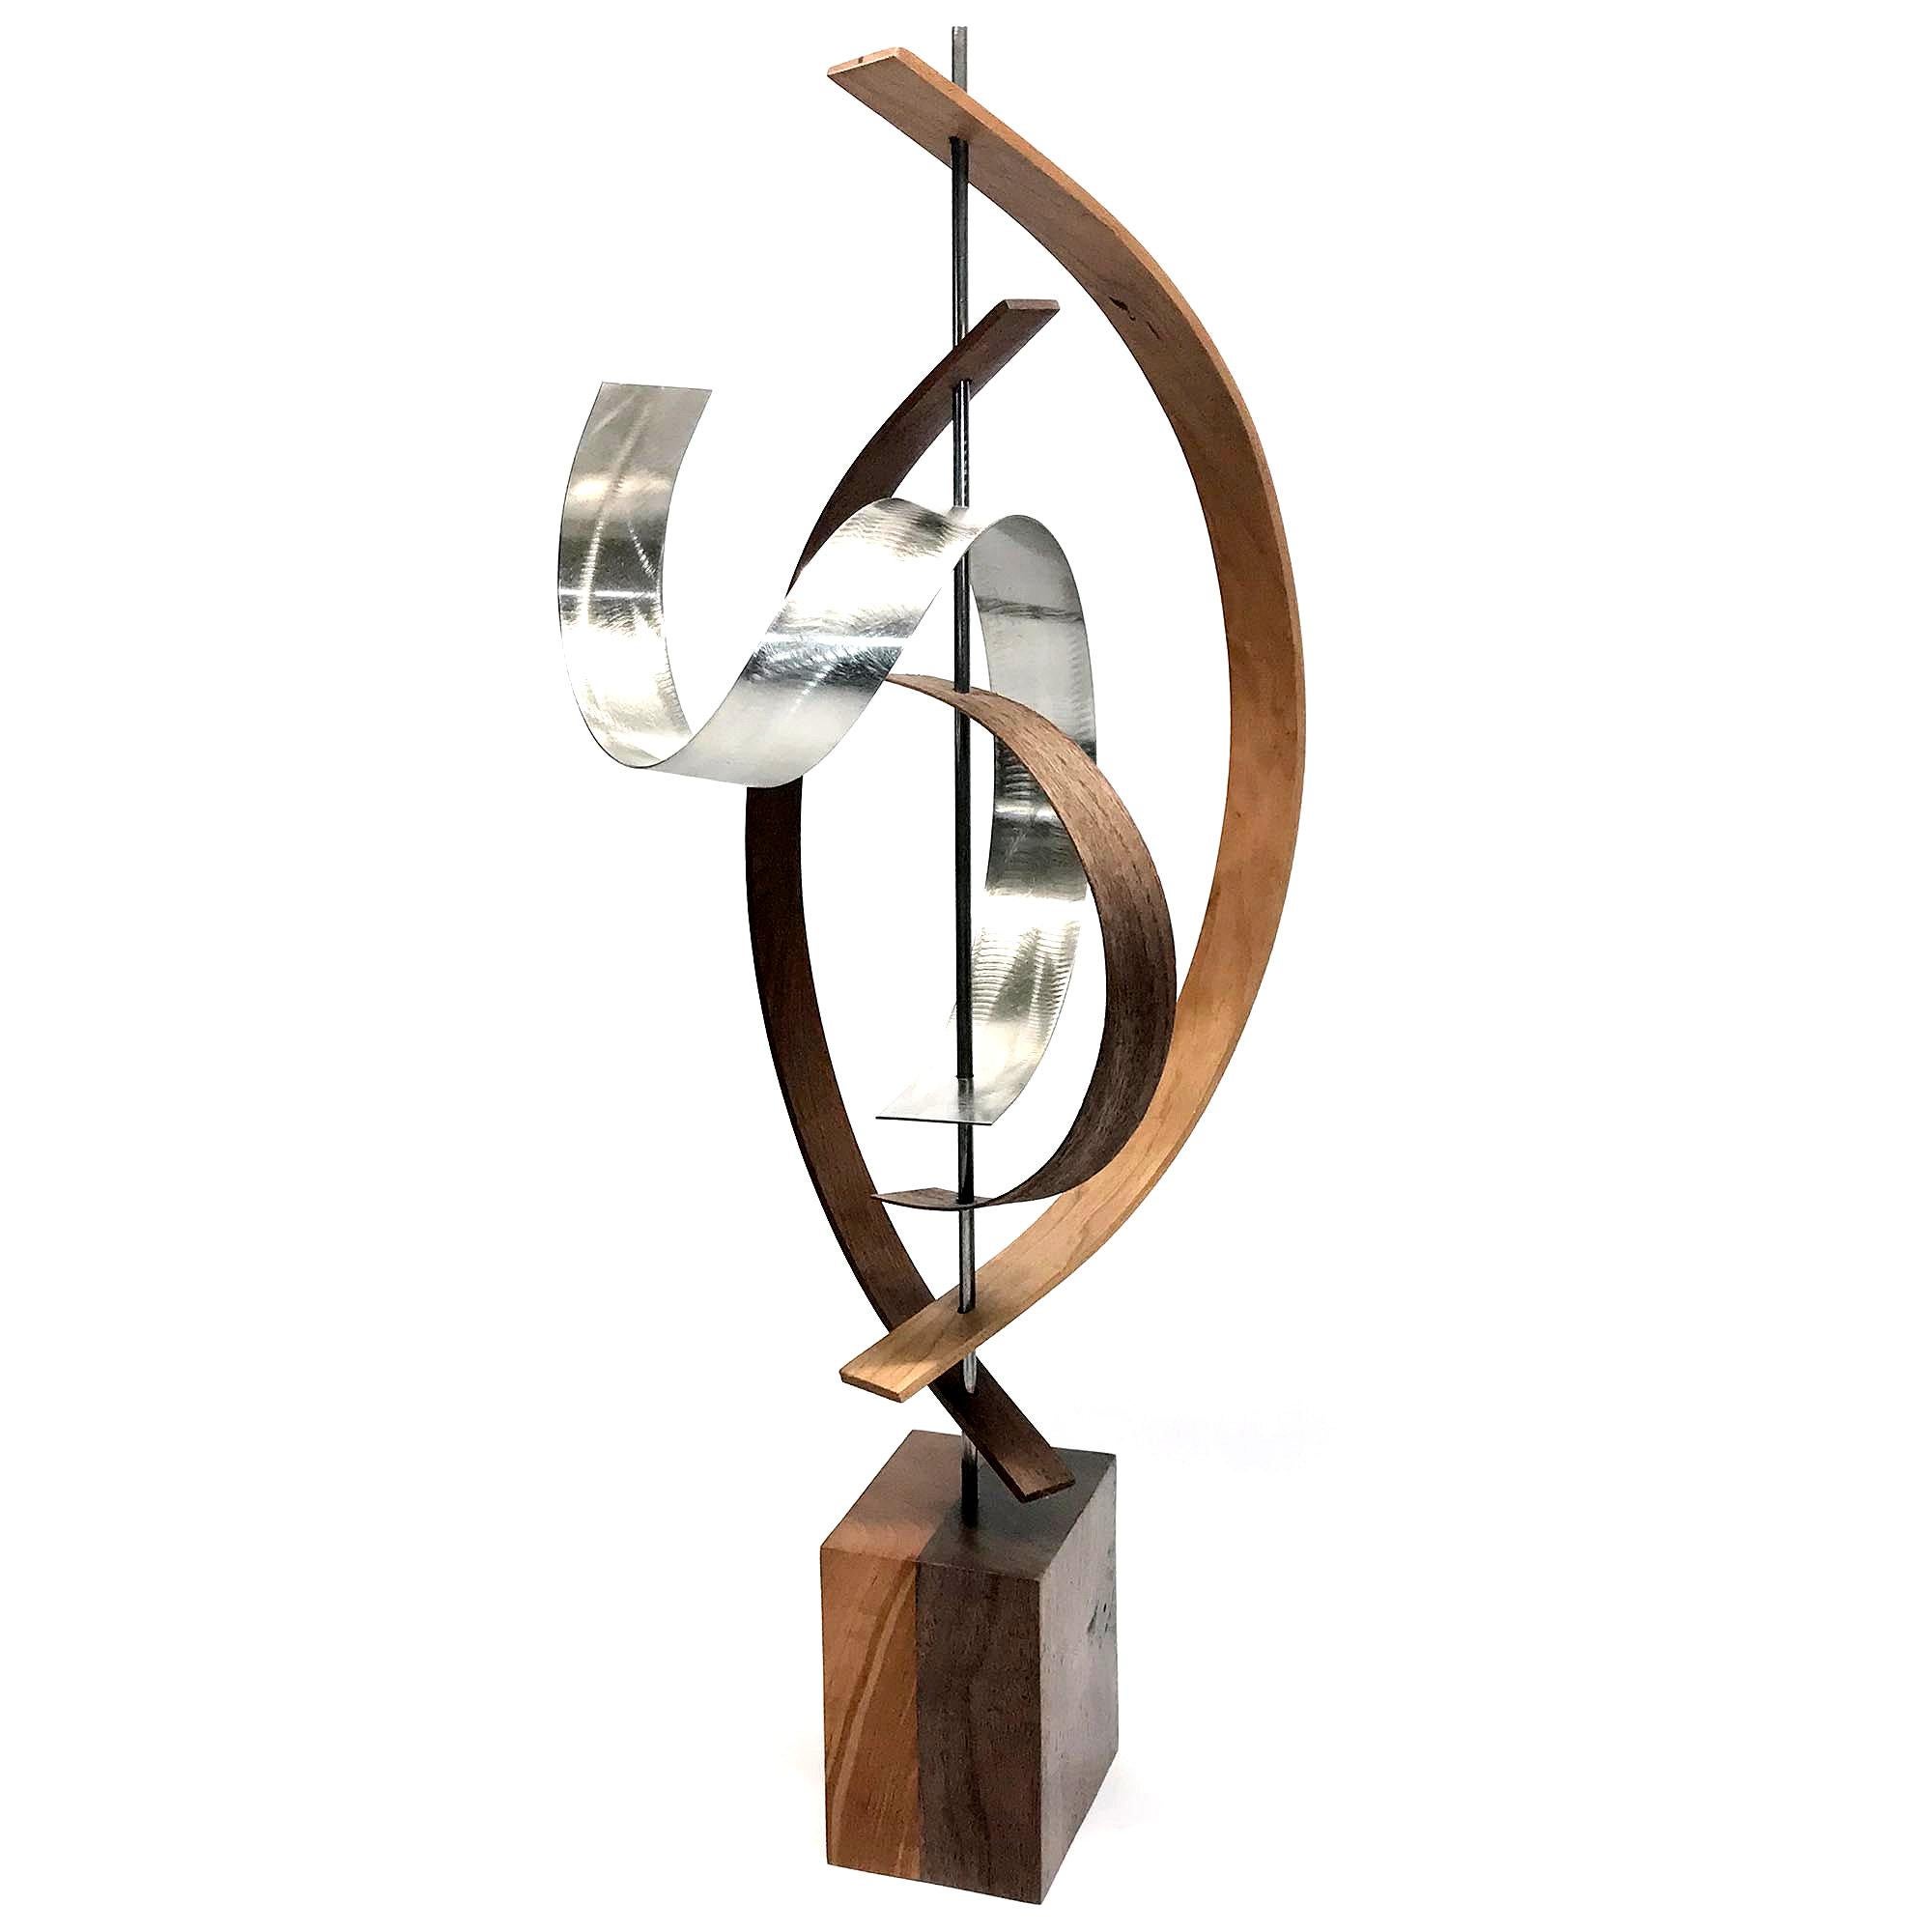 Description:  This sculpture consists of formed walnut and cherry wood, aluminum slat with custom grind. This sculpture is an open-edition multiple original; hand-made by the artist.
Title: Lift

Artist Bio:
Jeff was born and raised in Toledo Ohio